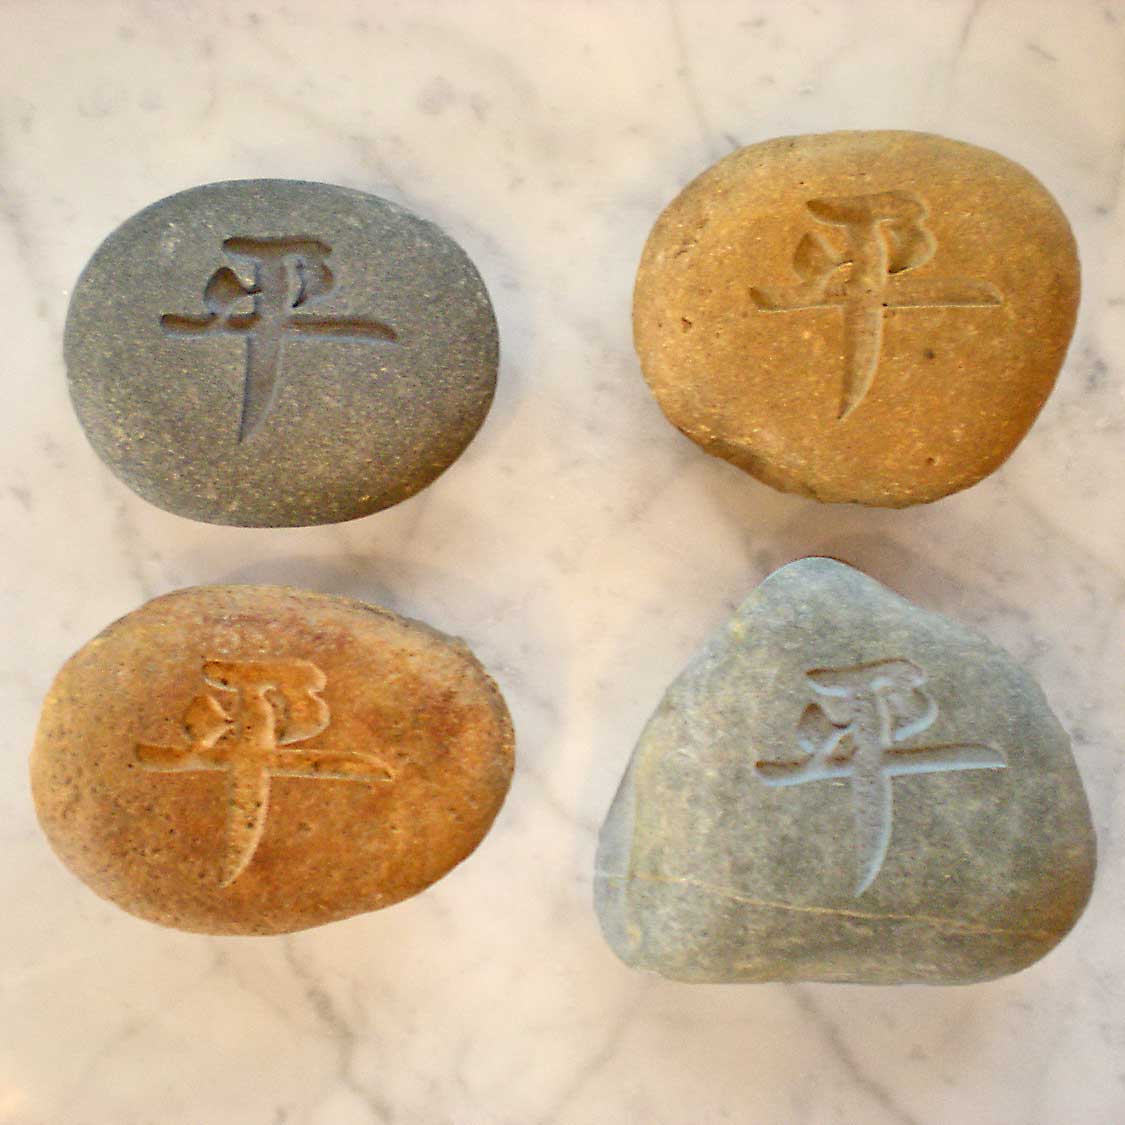 Stone Forest Peace Character Pebbles are  each uniquely carved from natural river pebbles image 2 of 7